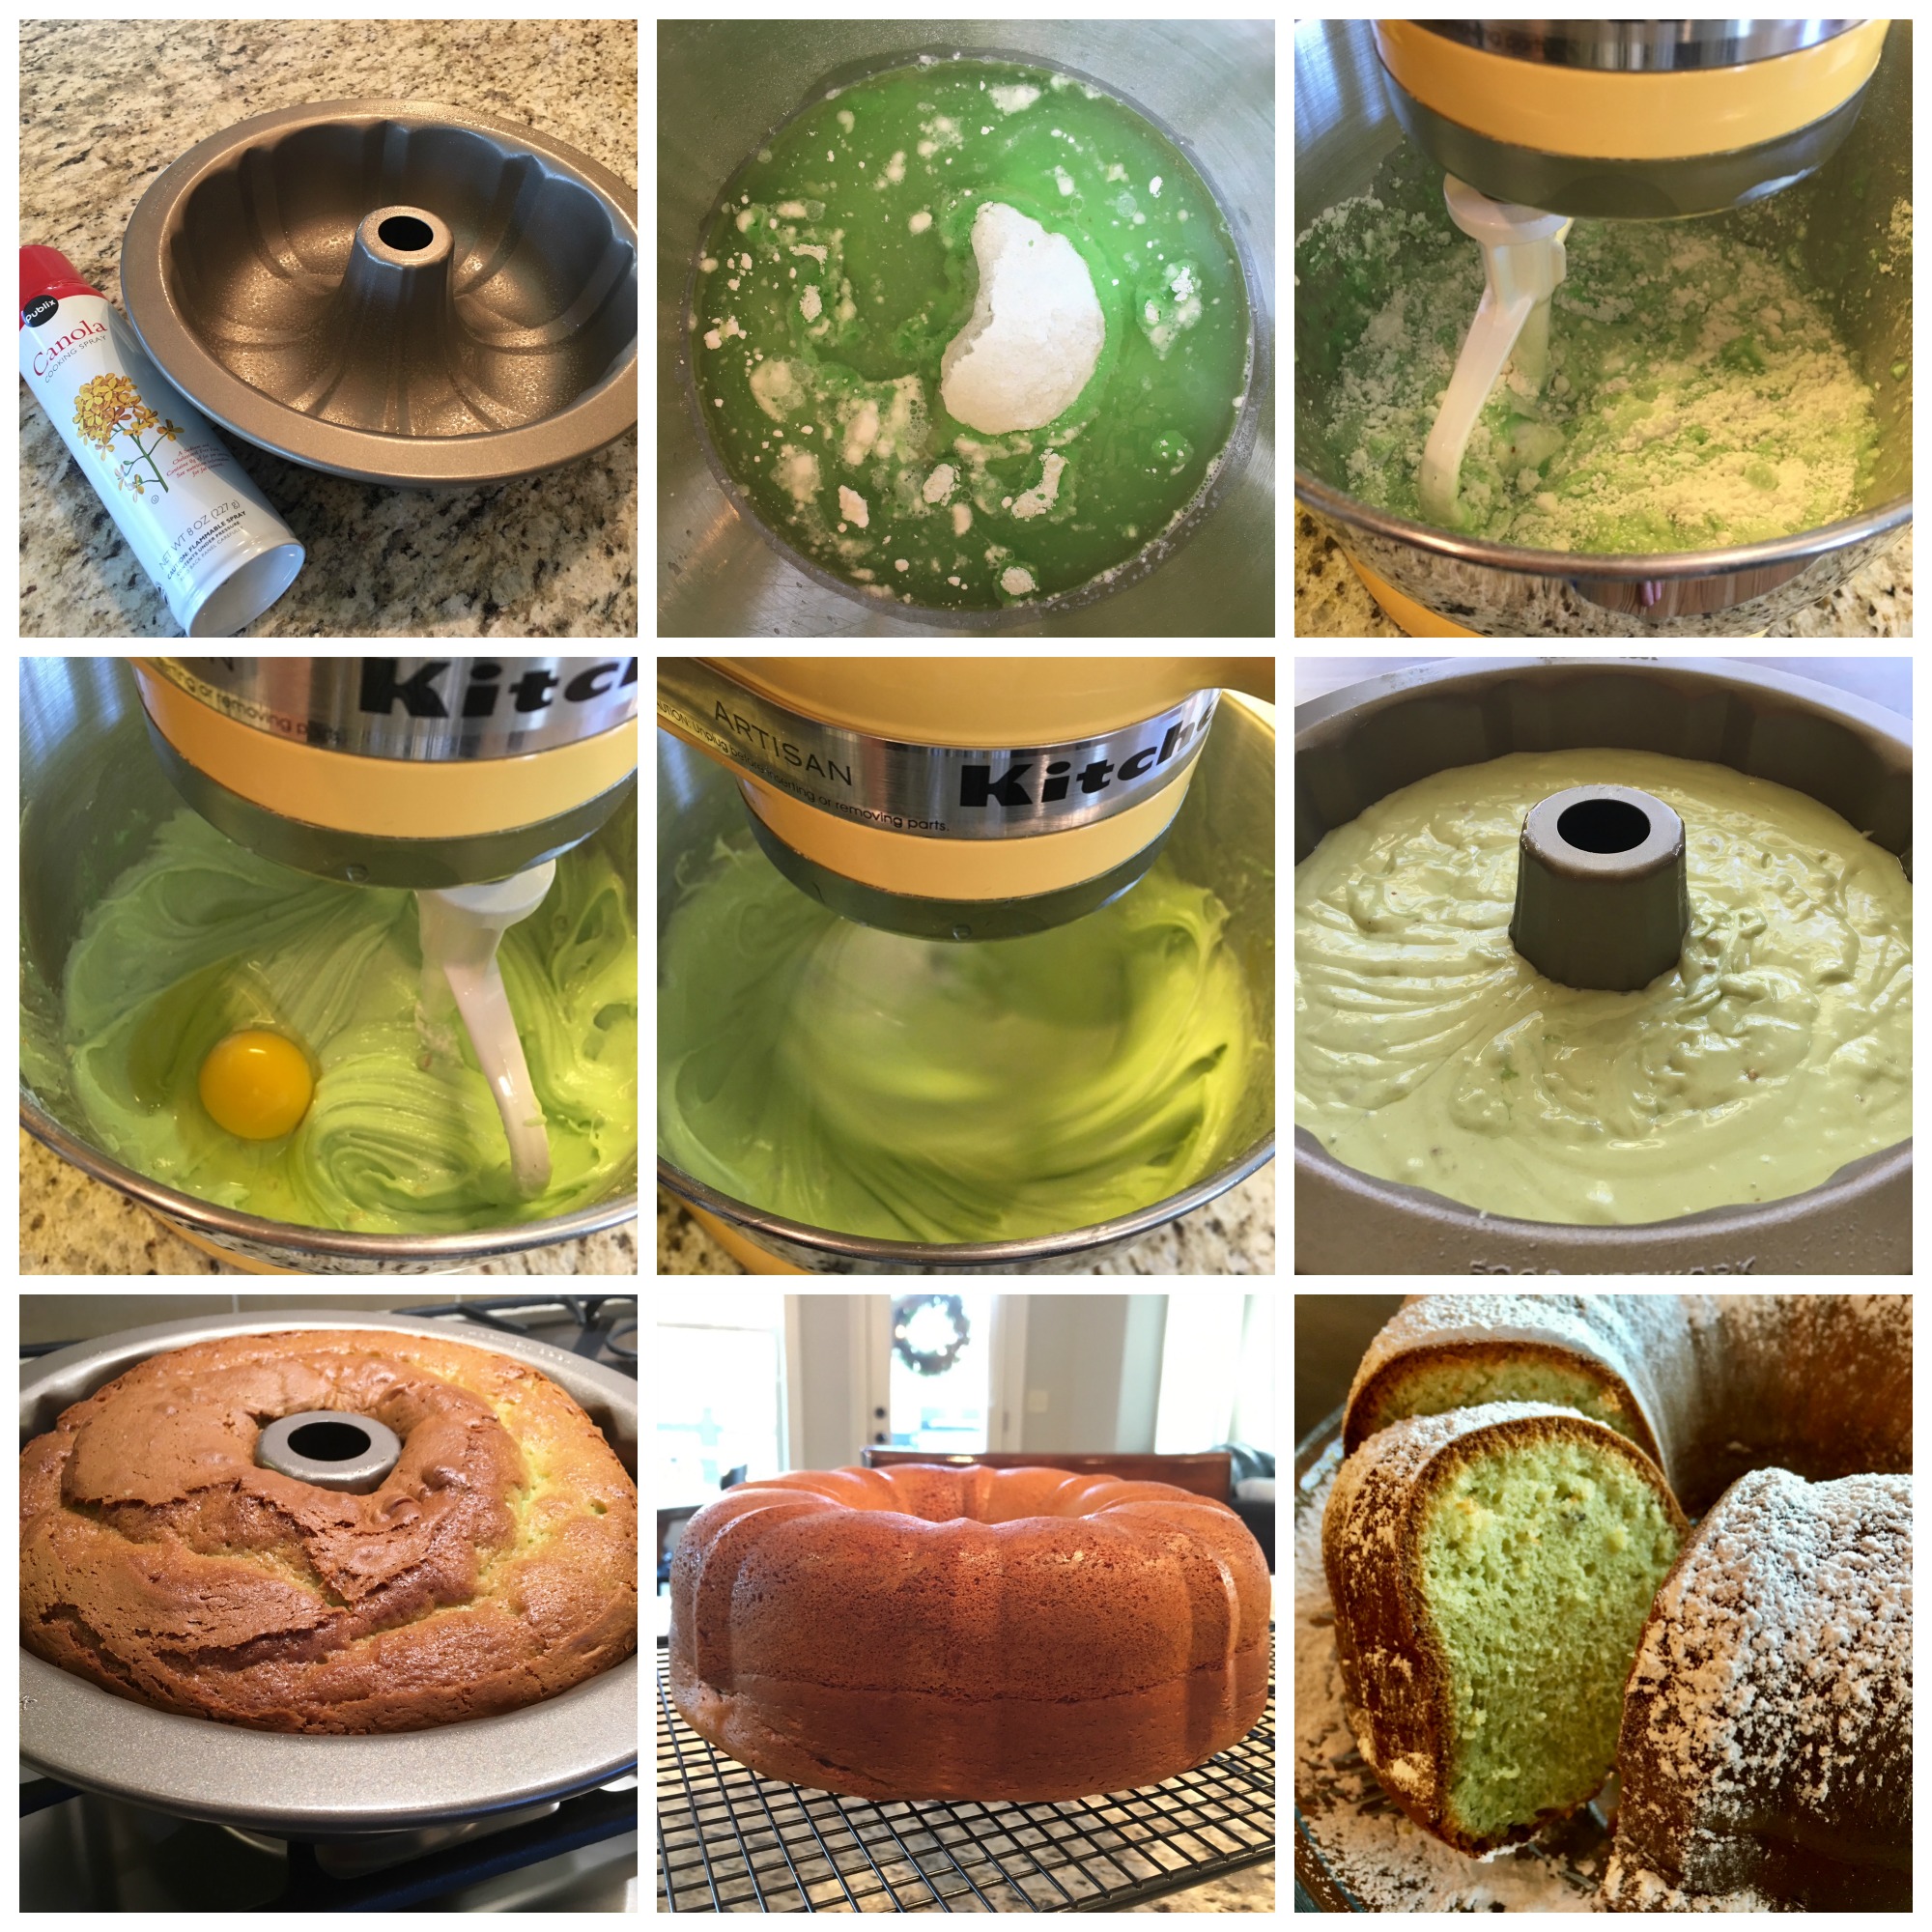 This is a 9 image collage showing the pistachio pudding cake being made.